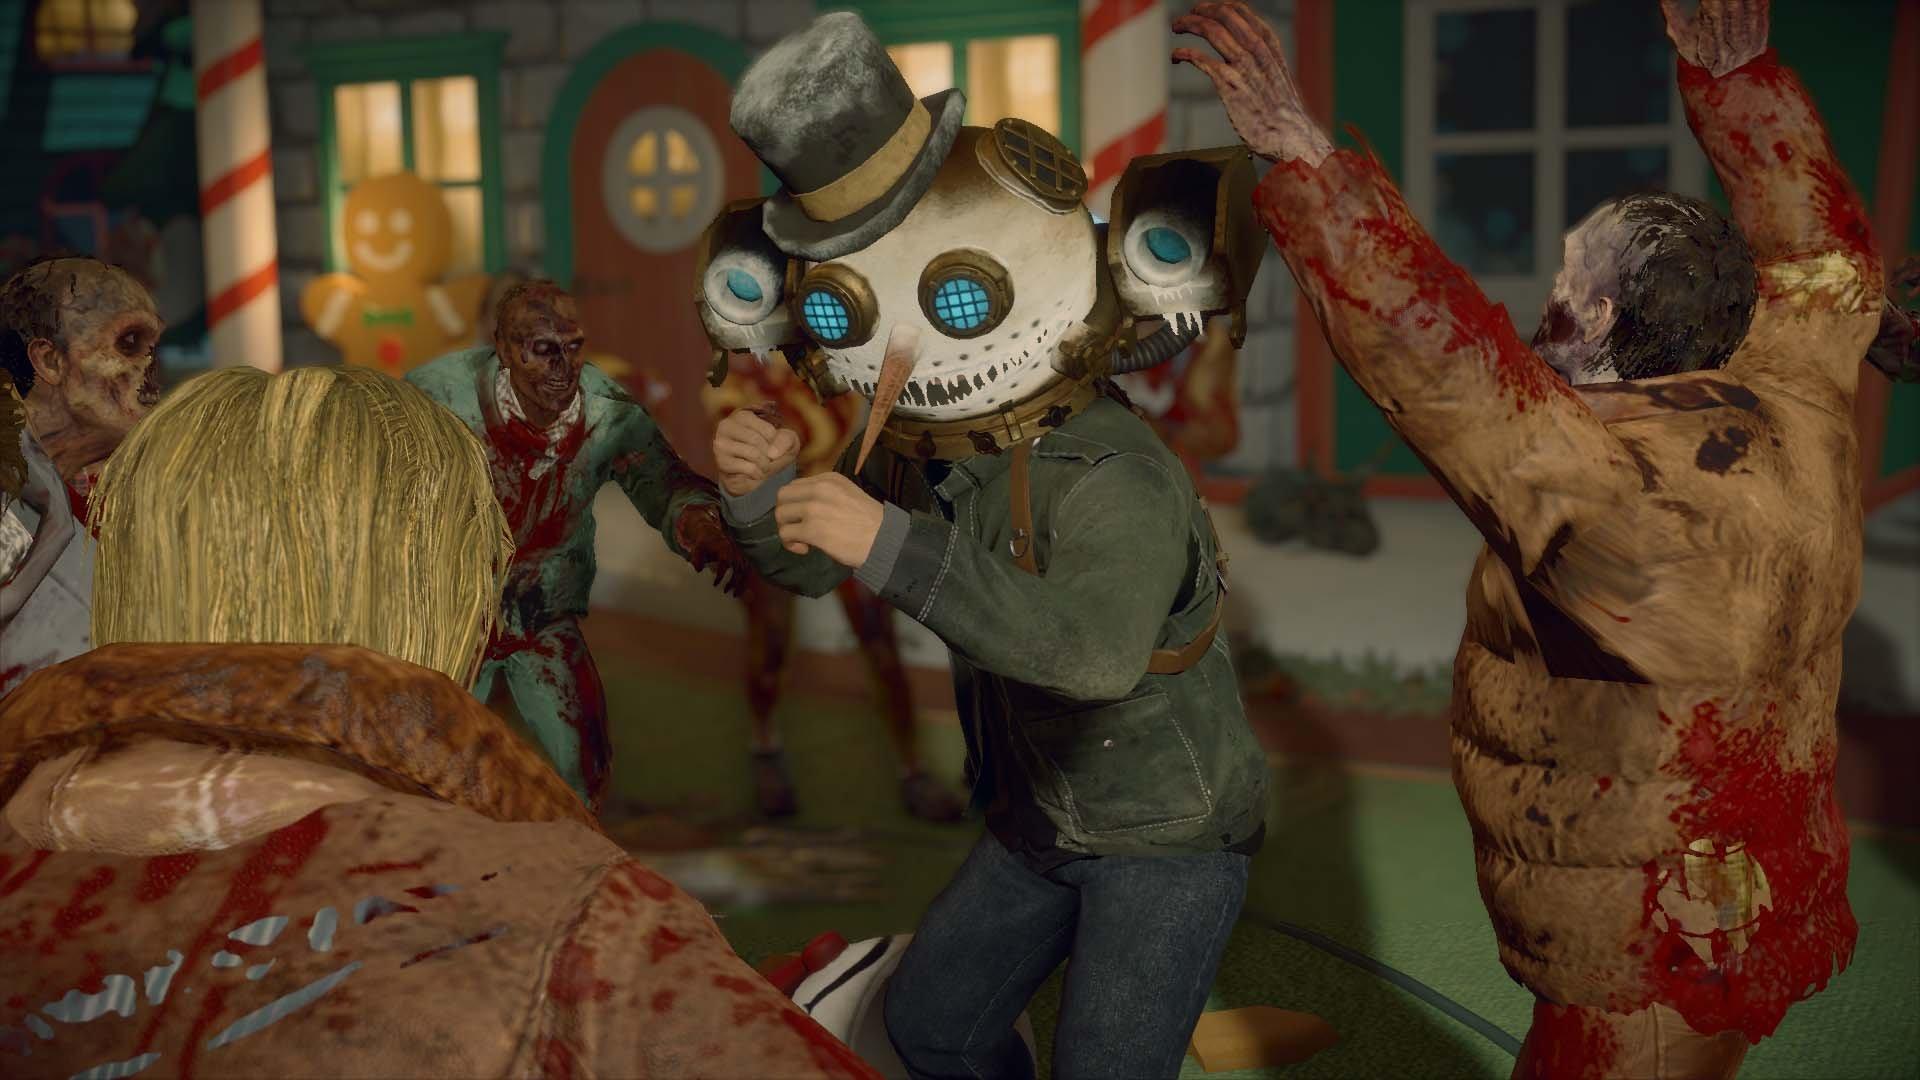 Dead Rising Triple Pack' brings zombie carnage to PS4 owners